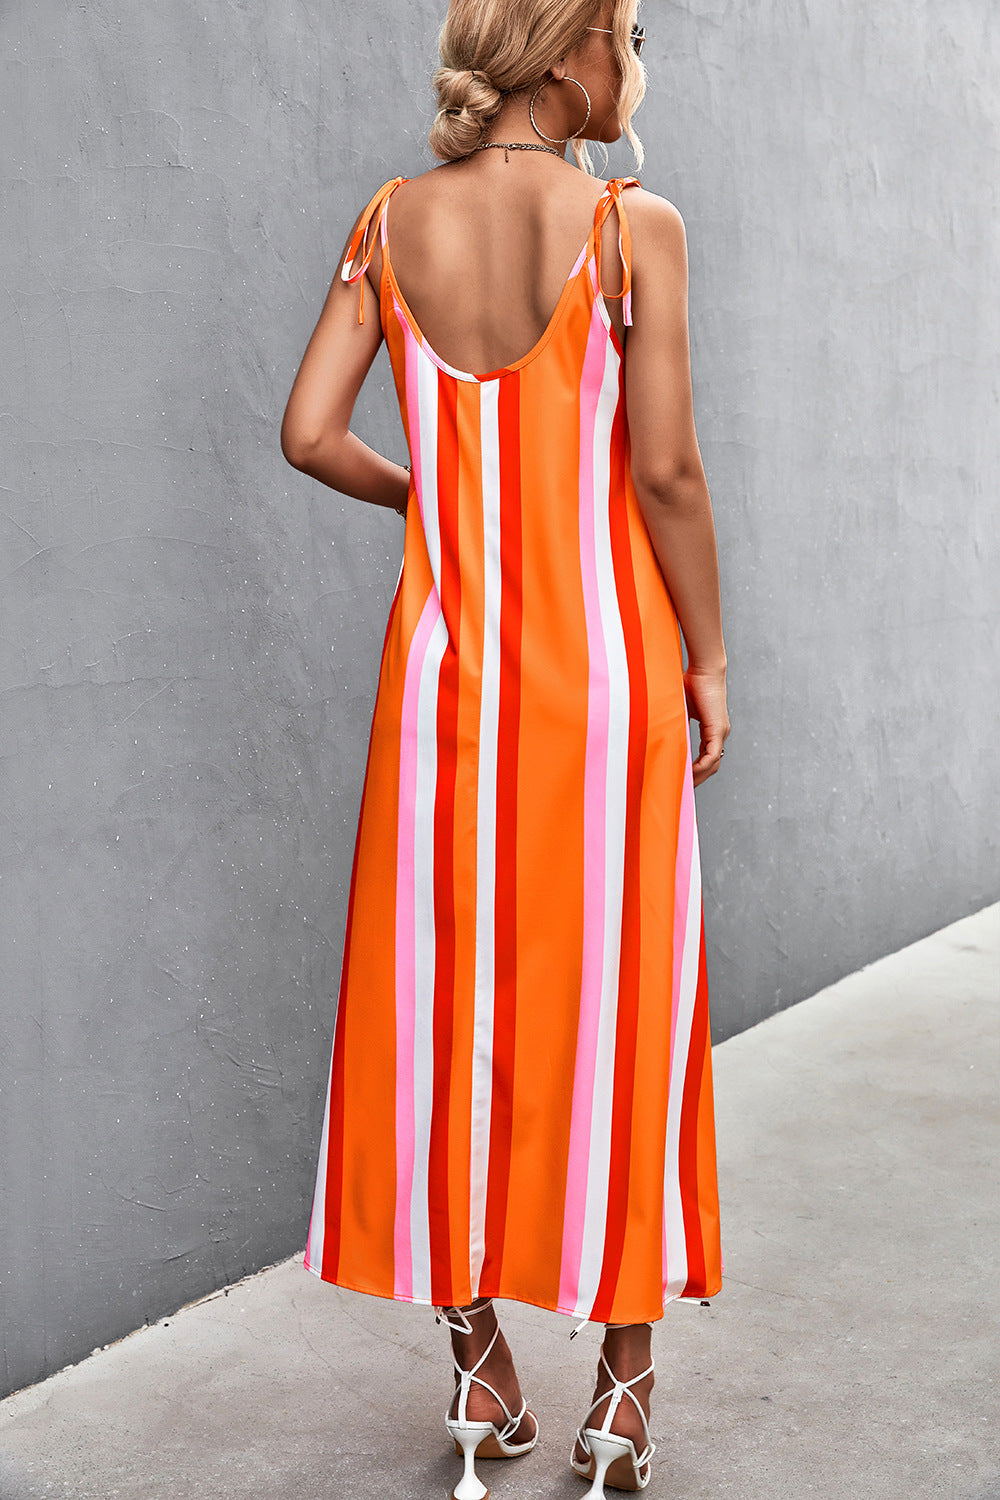 Sexy Backless Striped Long Sleeveless Dresses